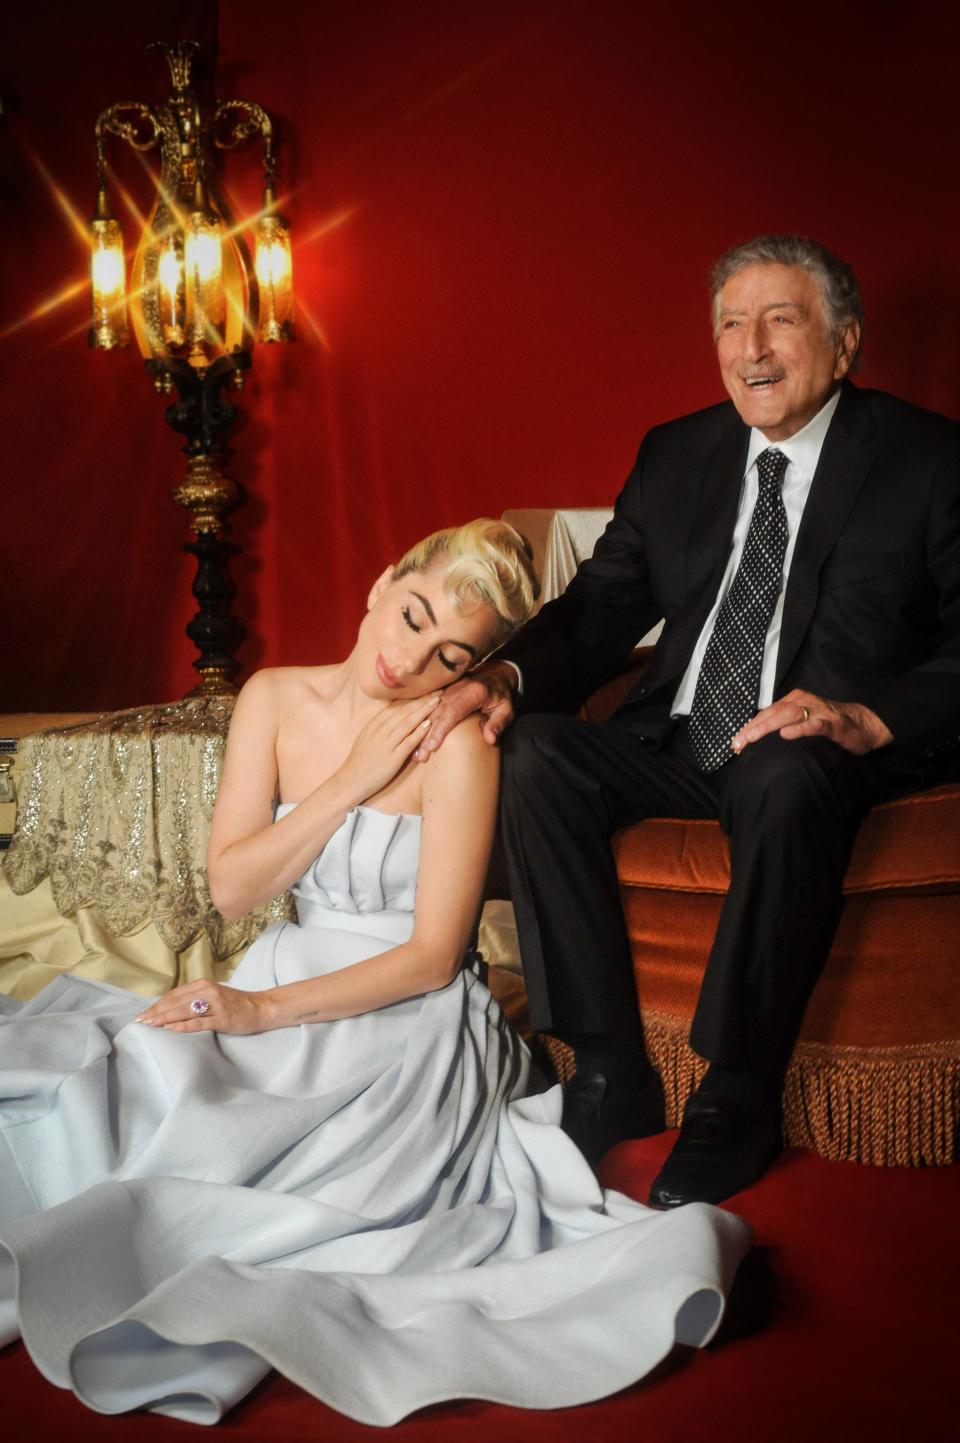 Lady Gaga and Tony Bennett's new jazz album, "Love for Sale," was released last week.